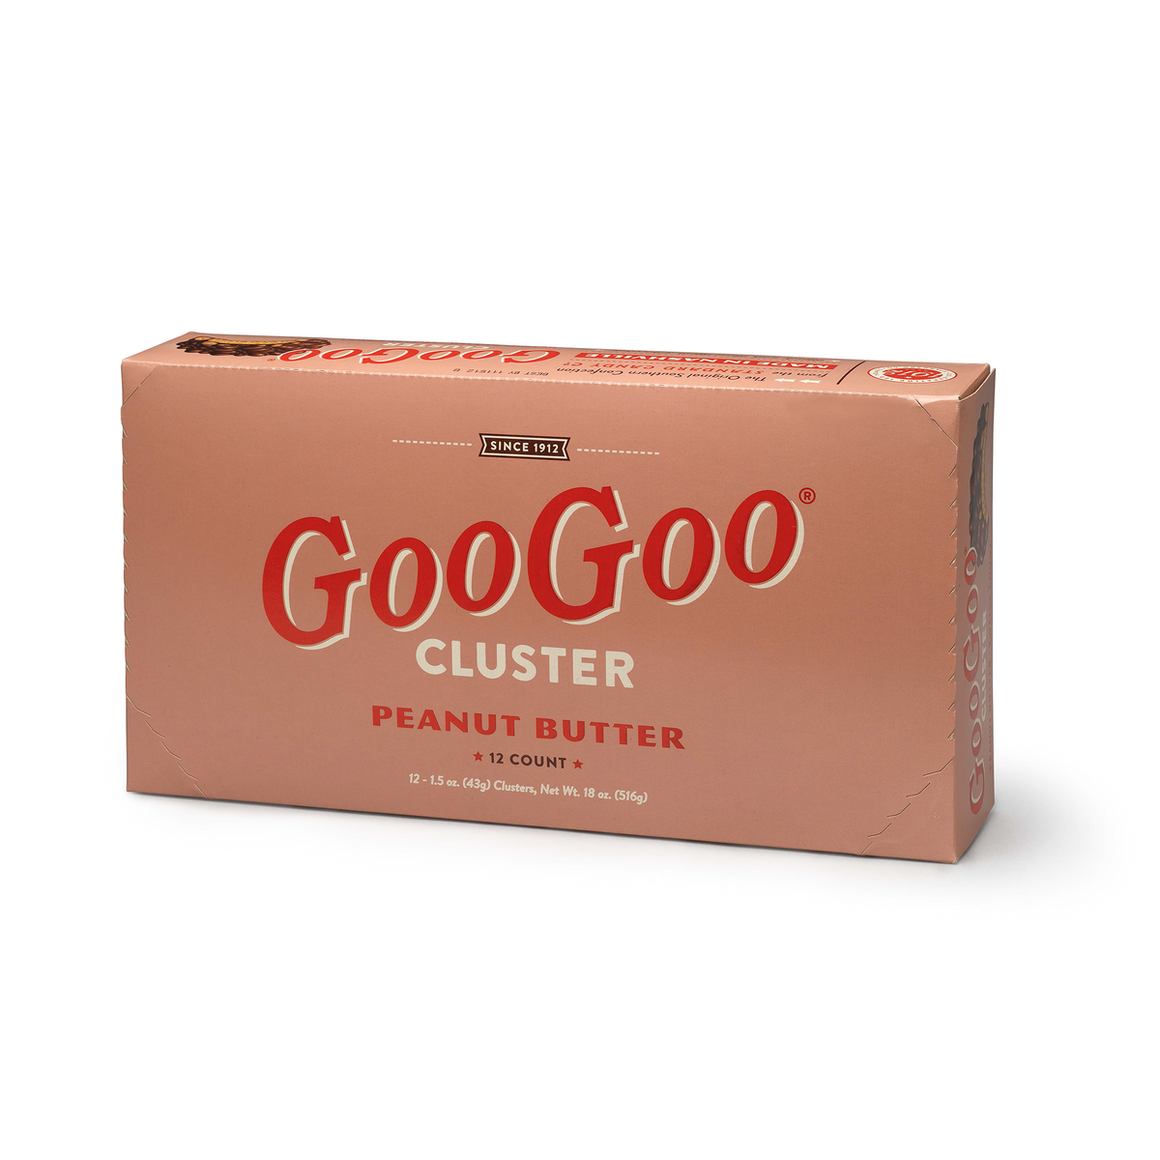 All City Candy Goo Goo Cluster Peanut Butter Candy Bar 1.5 oz. Candy Bars Standard Candy Company 1 Piece For fresh candy and great service, visit www.allcitycandy.com